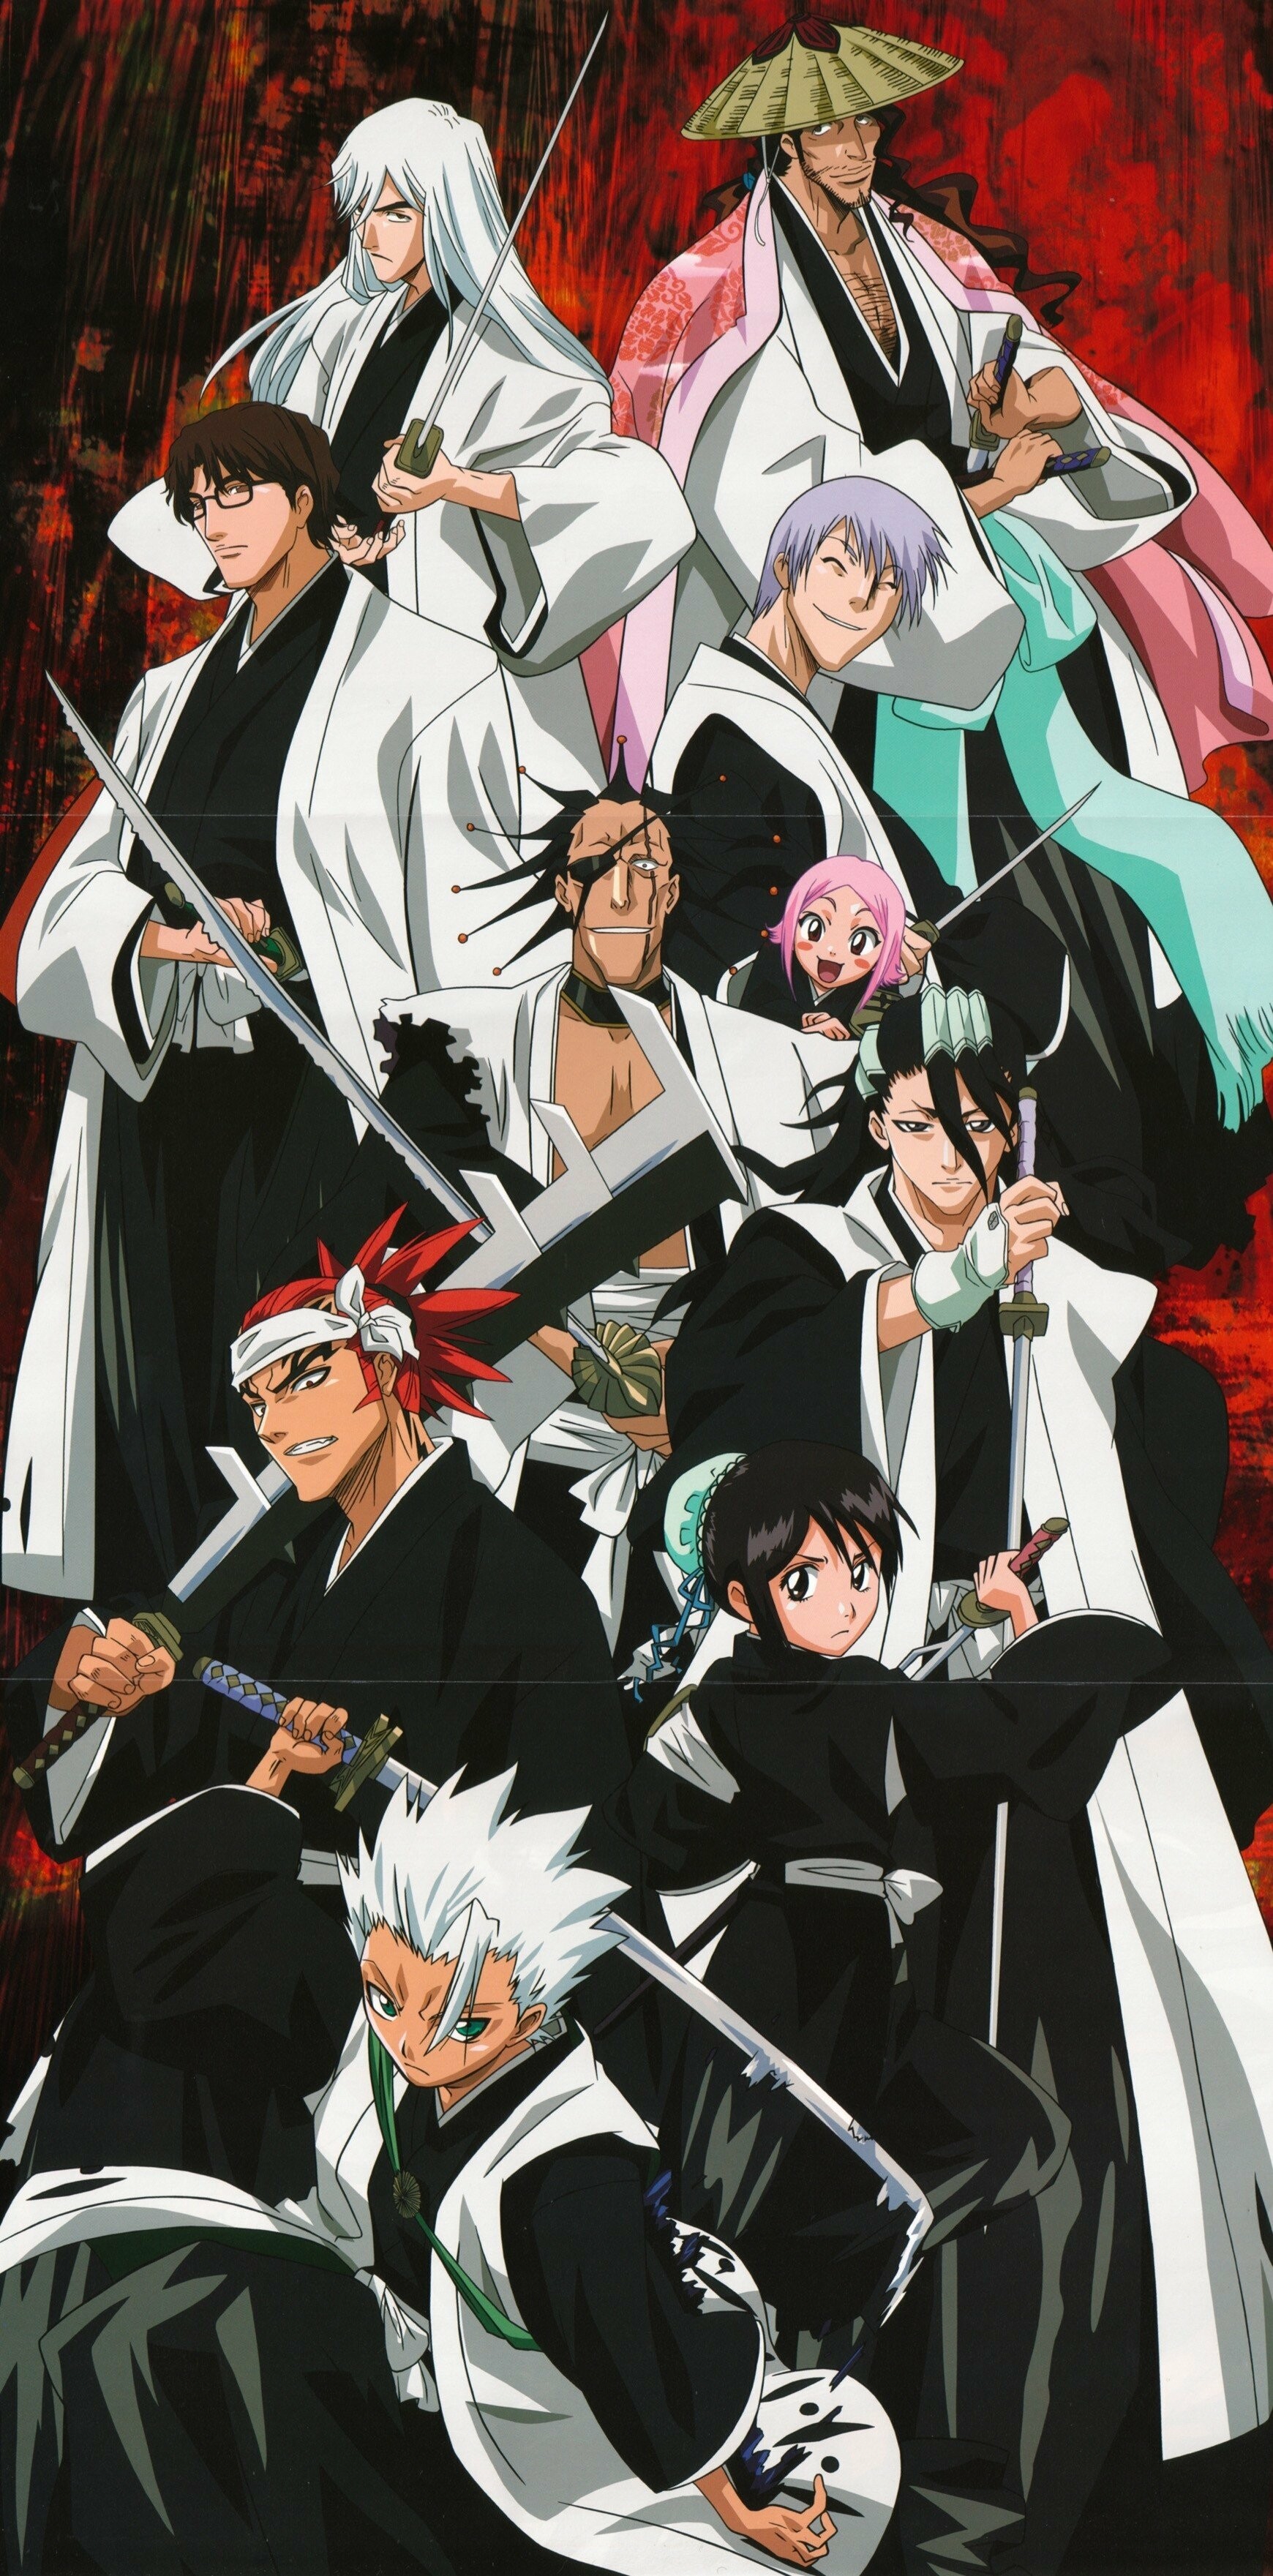 Bleach: Thousand Year Blood War: A Japanese anime television series based on the manga series by Tite Kubo. 1740x3530 HD Wallpaper.